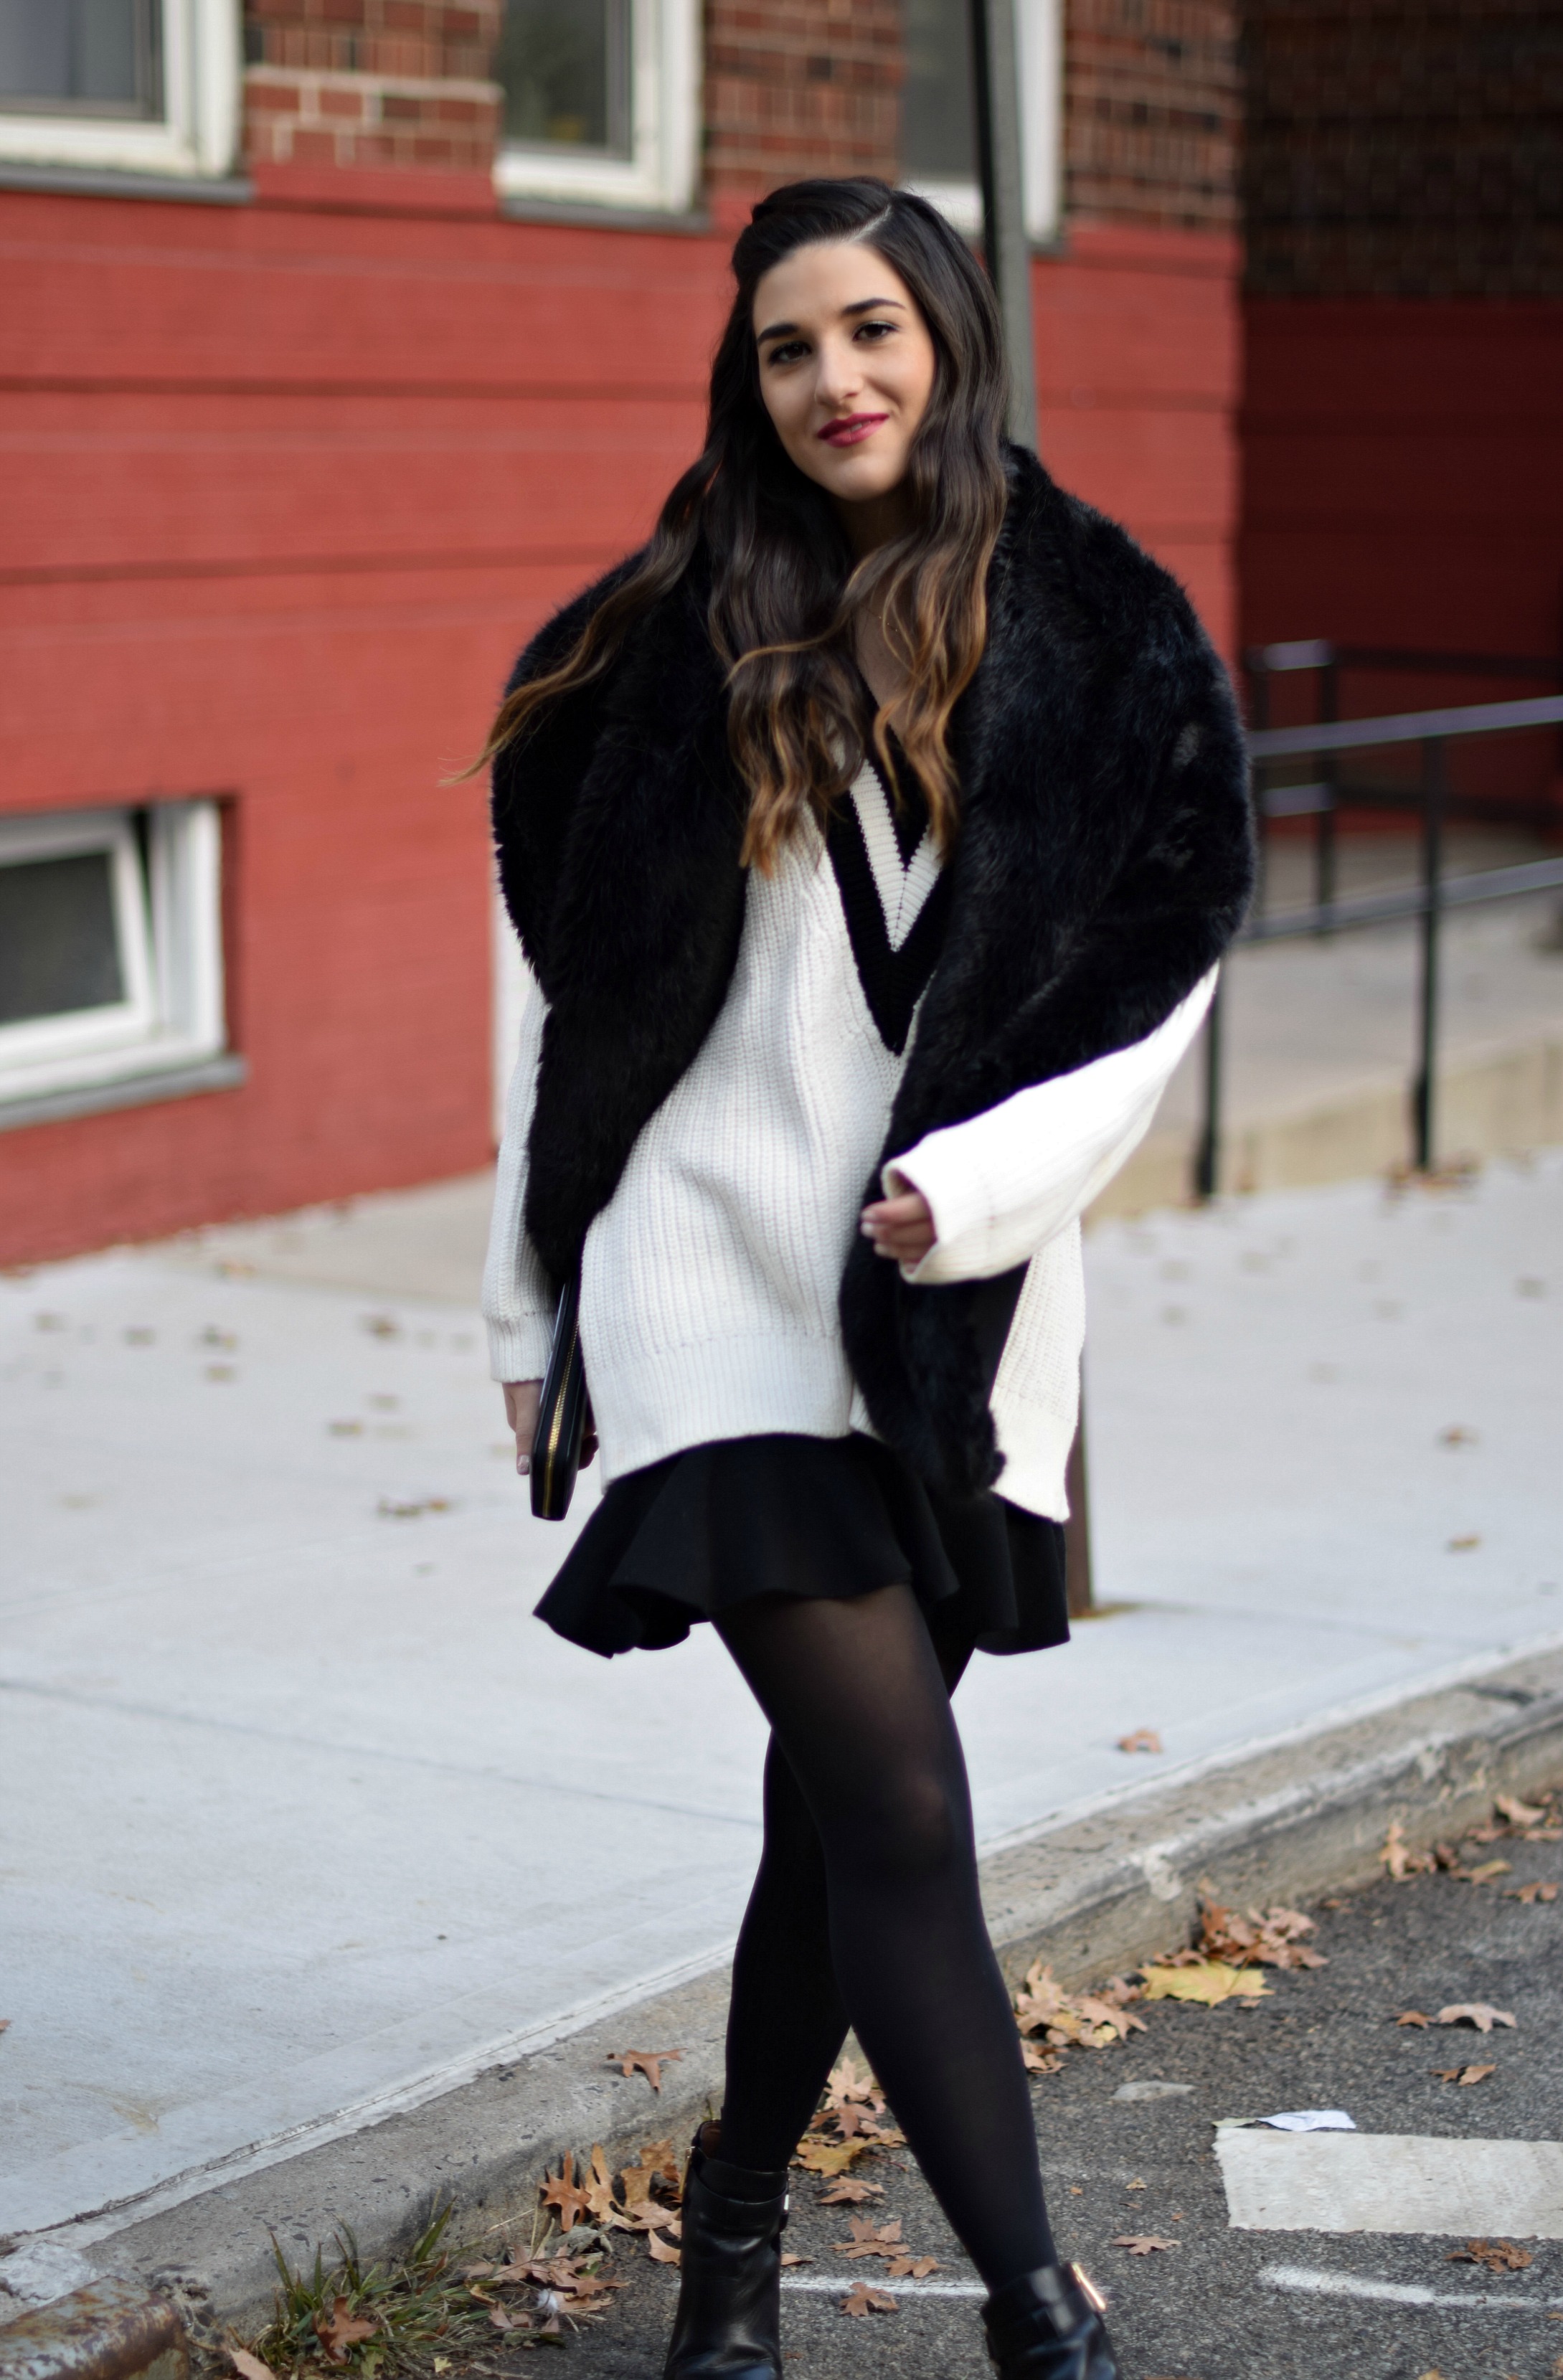 Chunky Varsity Knit Fur Stole Louboutins & Love Fashion Blog Esther Santer NYC Street Style Blogger Sweater Girl Women Photoshoot Model Shoes Black Booties Louise et Cie Nordstrom H&M Hair Swag Outfit OOTD Mini Skirt Neutral Winter Tights Wear Shop.jpg